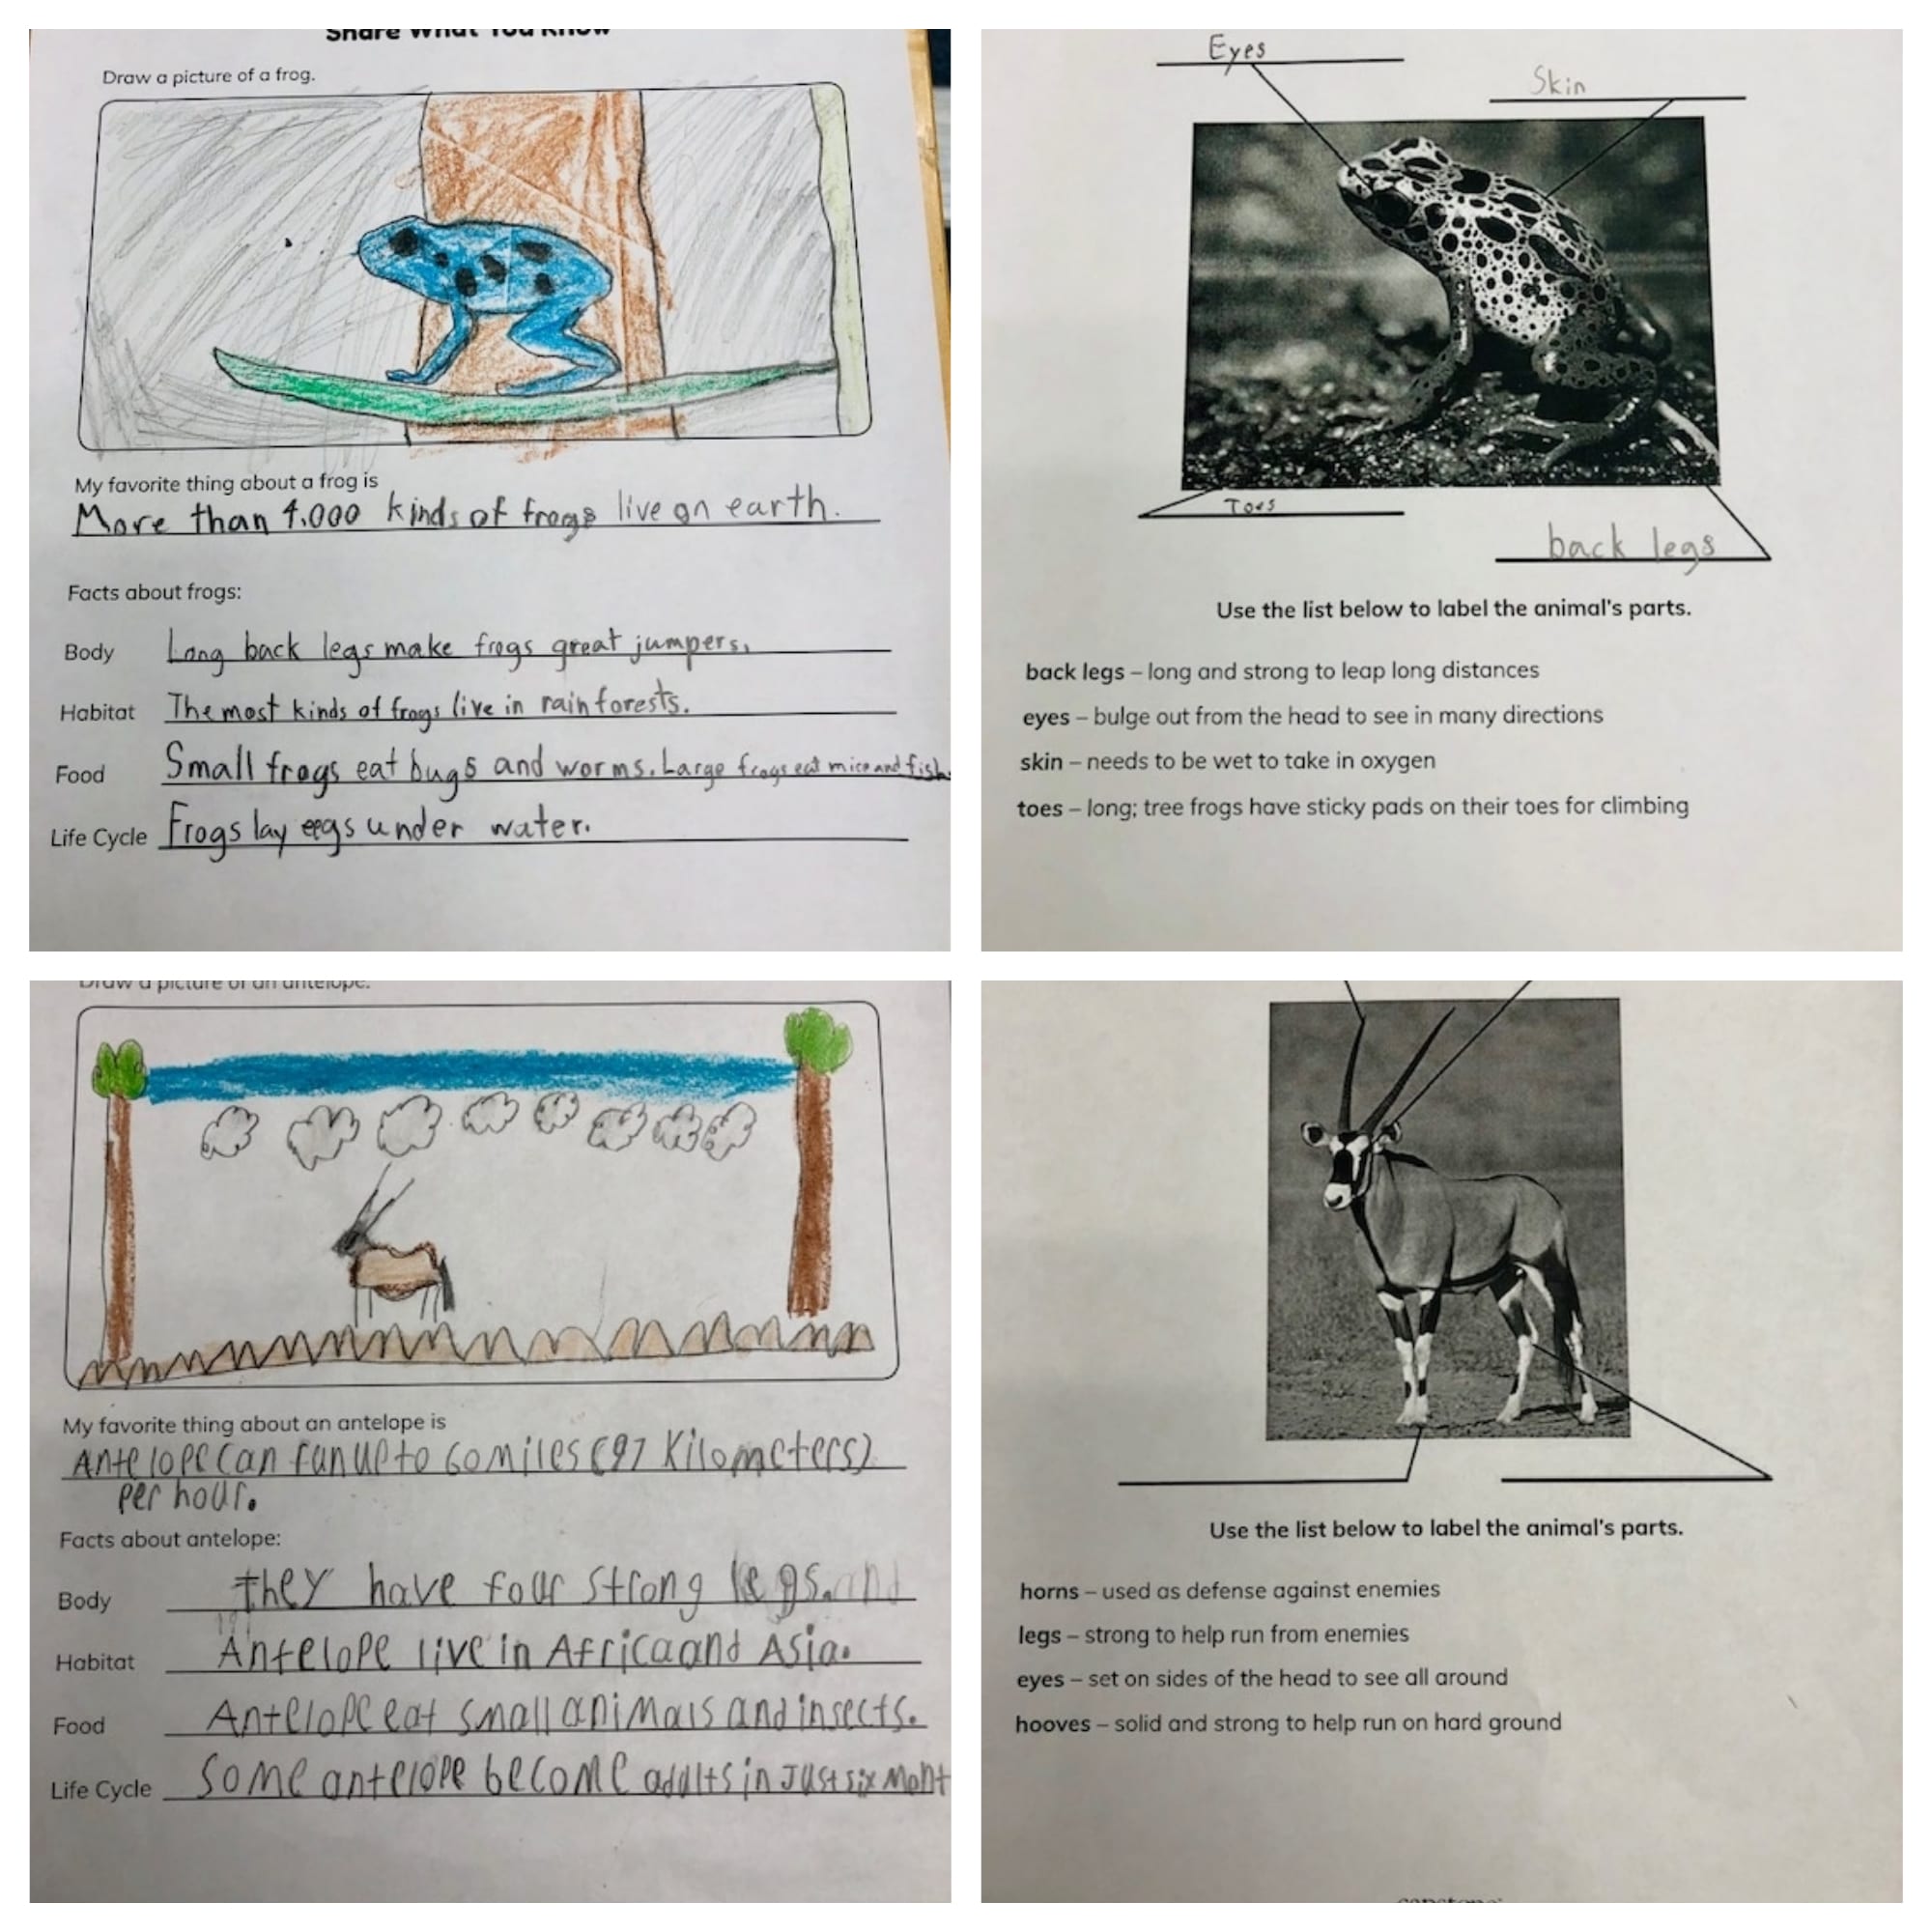 These are work samples from two students using PebbleGo and the correlating activity sheets.